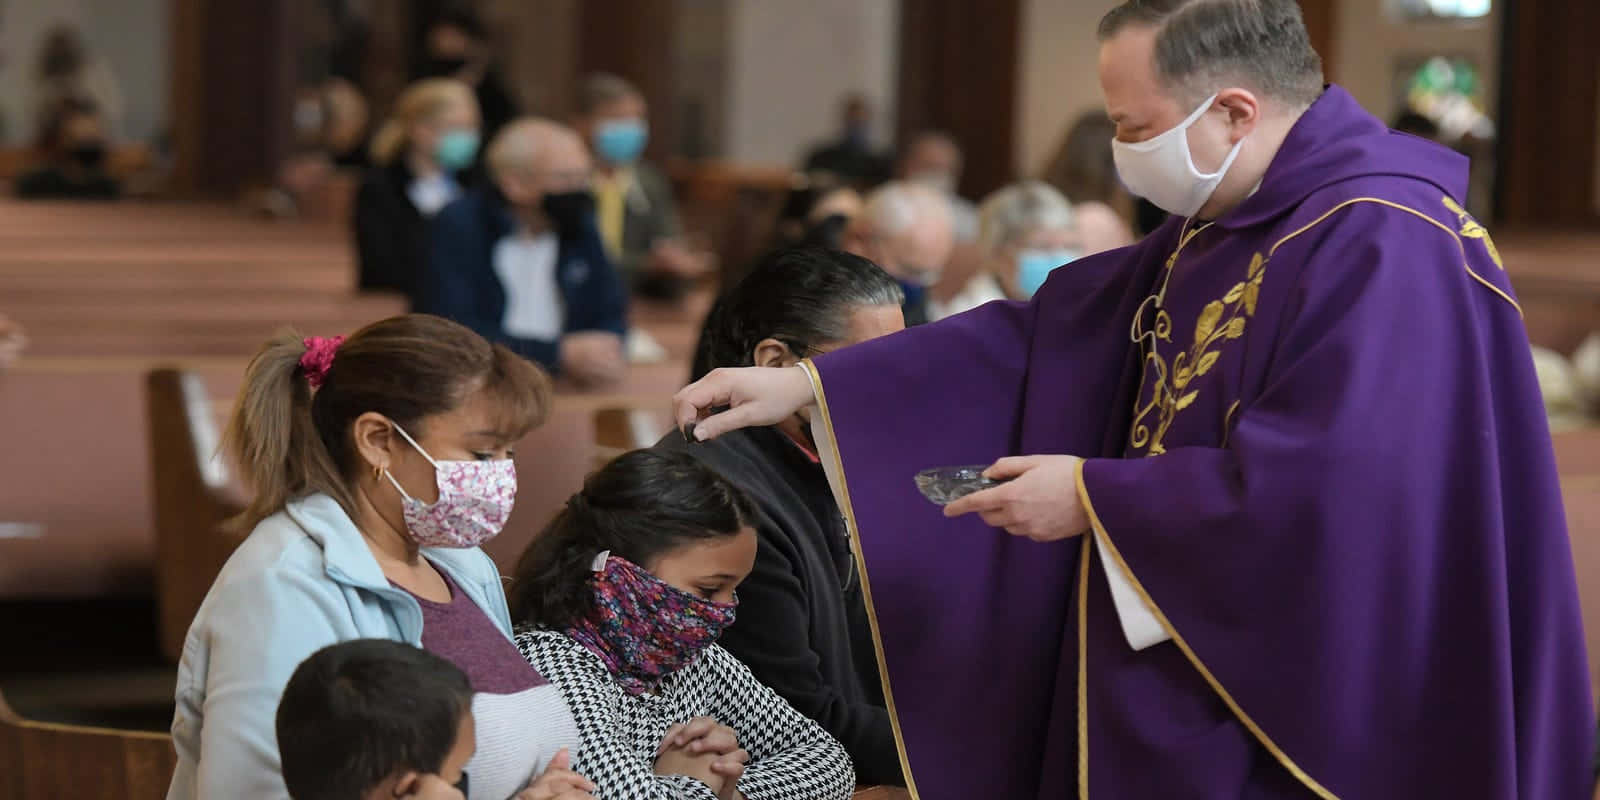 A Priest Is Wearing A Mask While He Is Preparing For A Mass